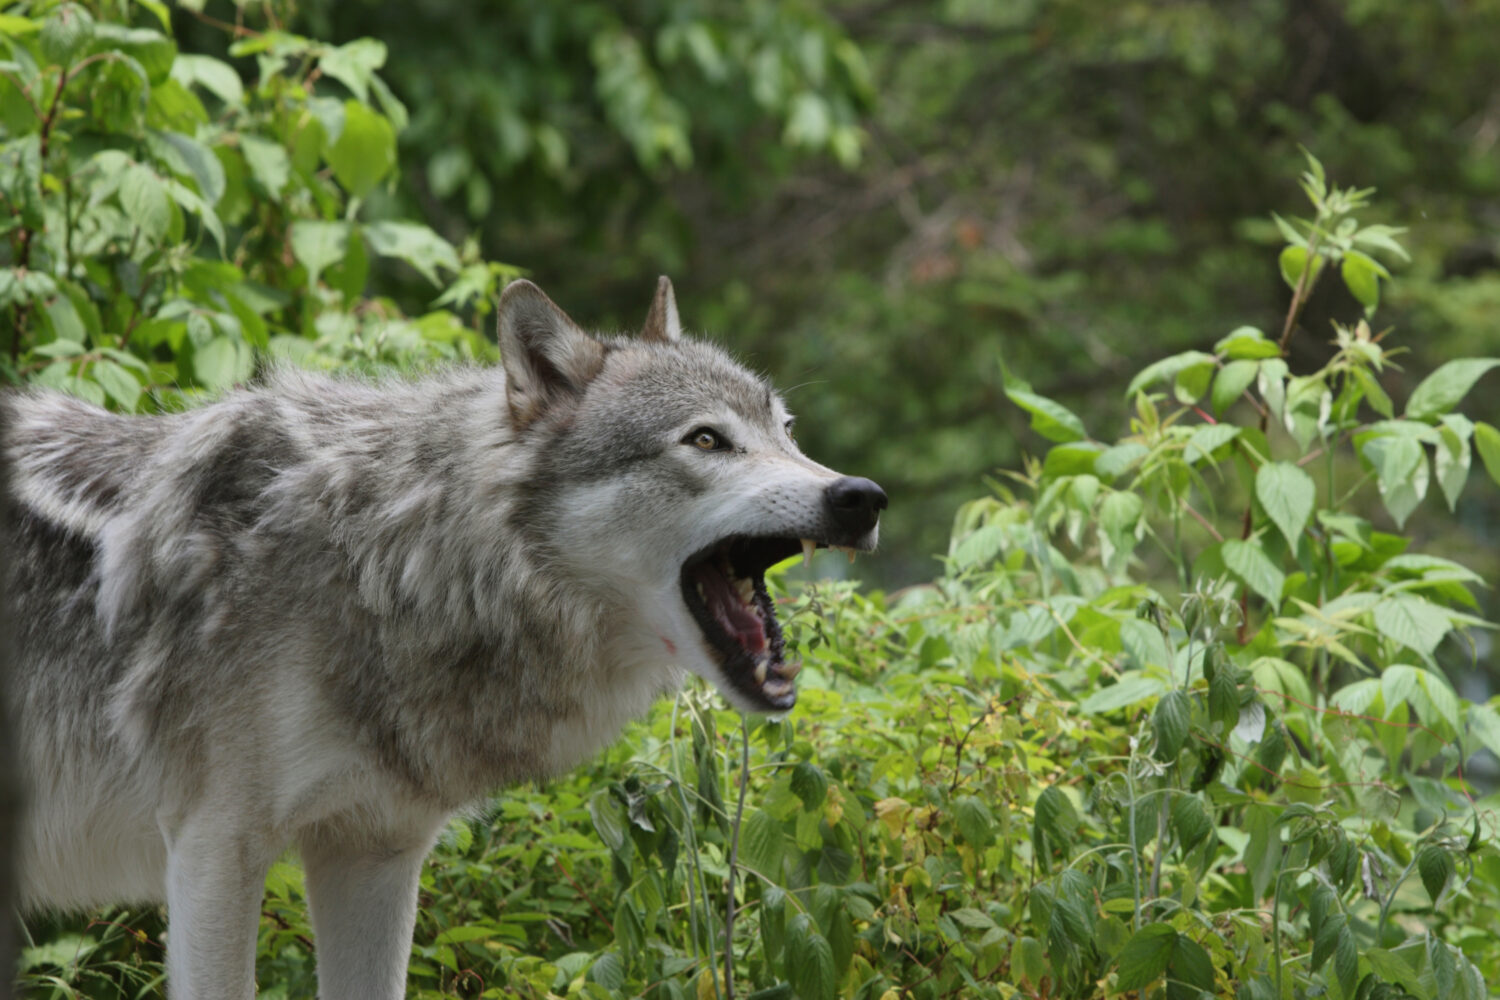 Wolf management in Wisconsin: Listening session and public comment opportunities